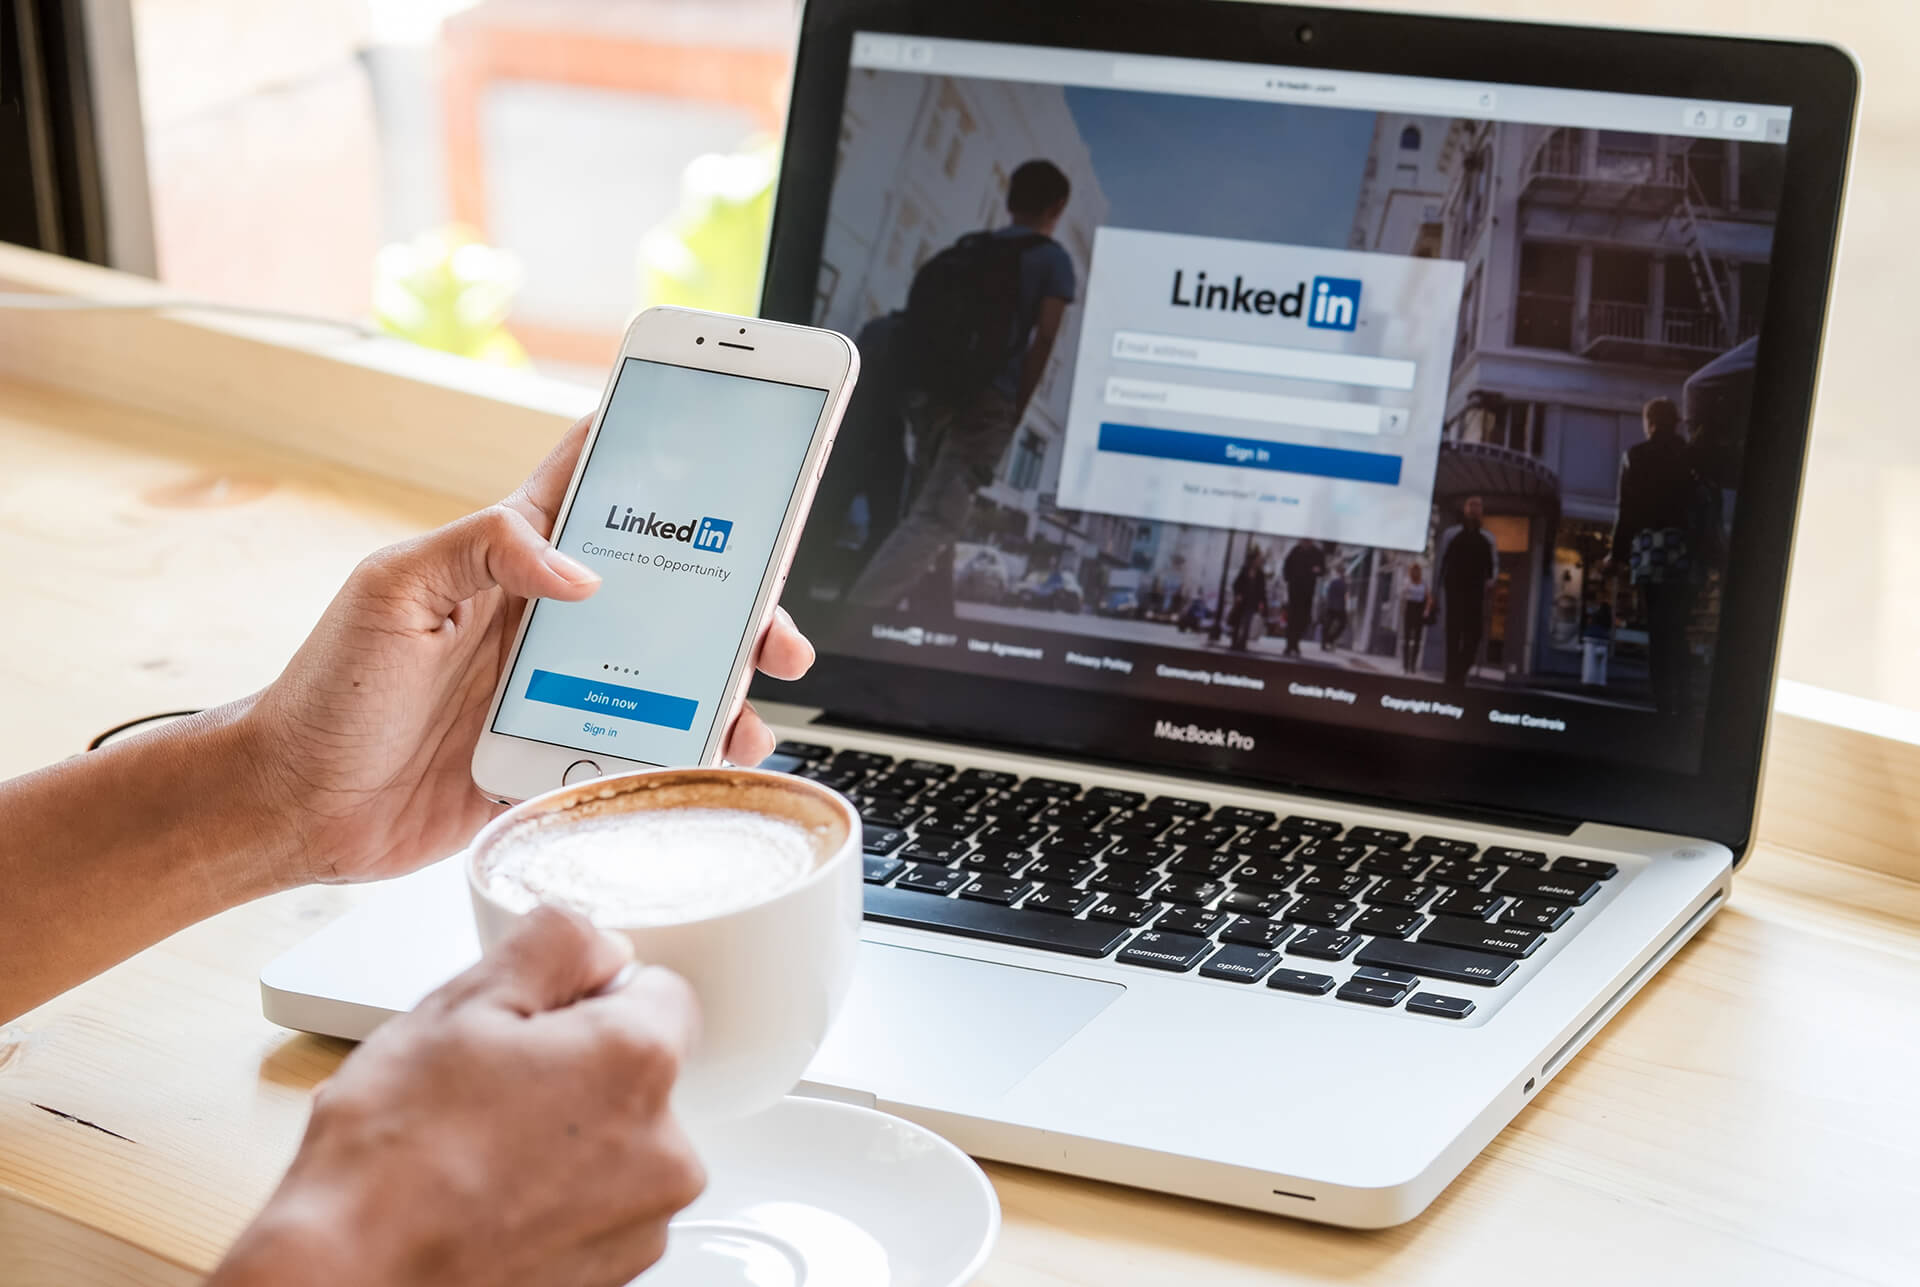 How to Benefit From Your LinkedIn Network